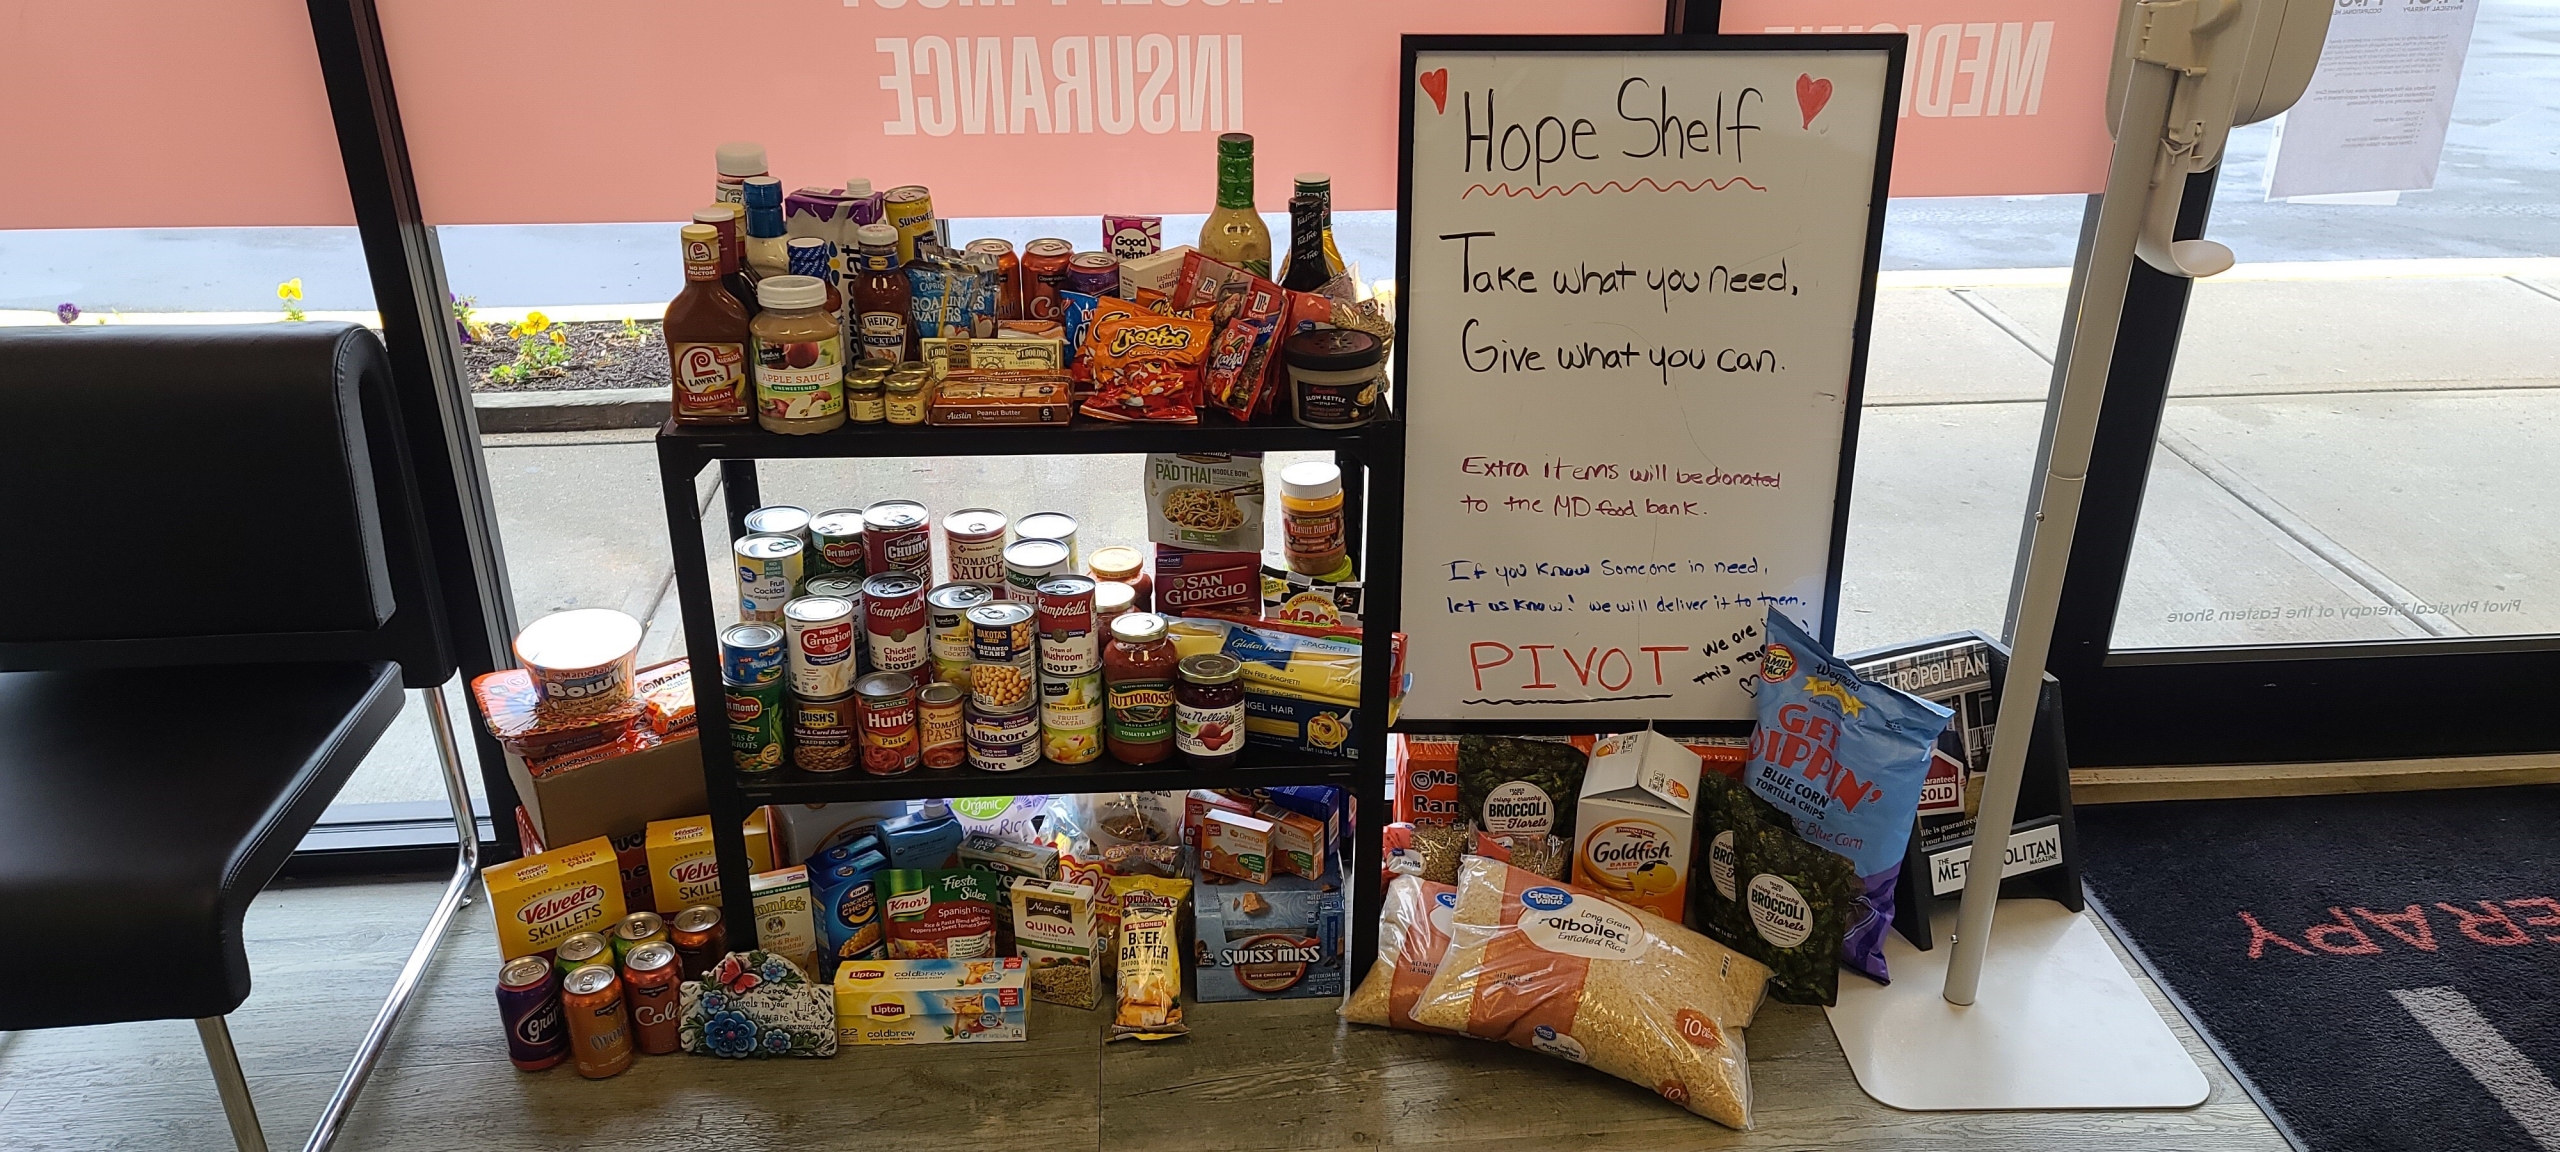 Pivot Physical Therapy Food Pantry